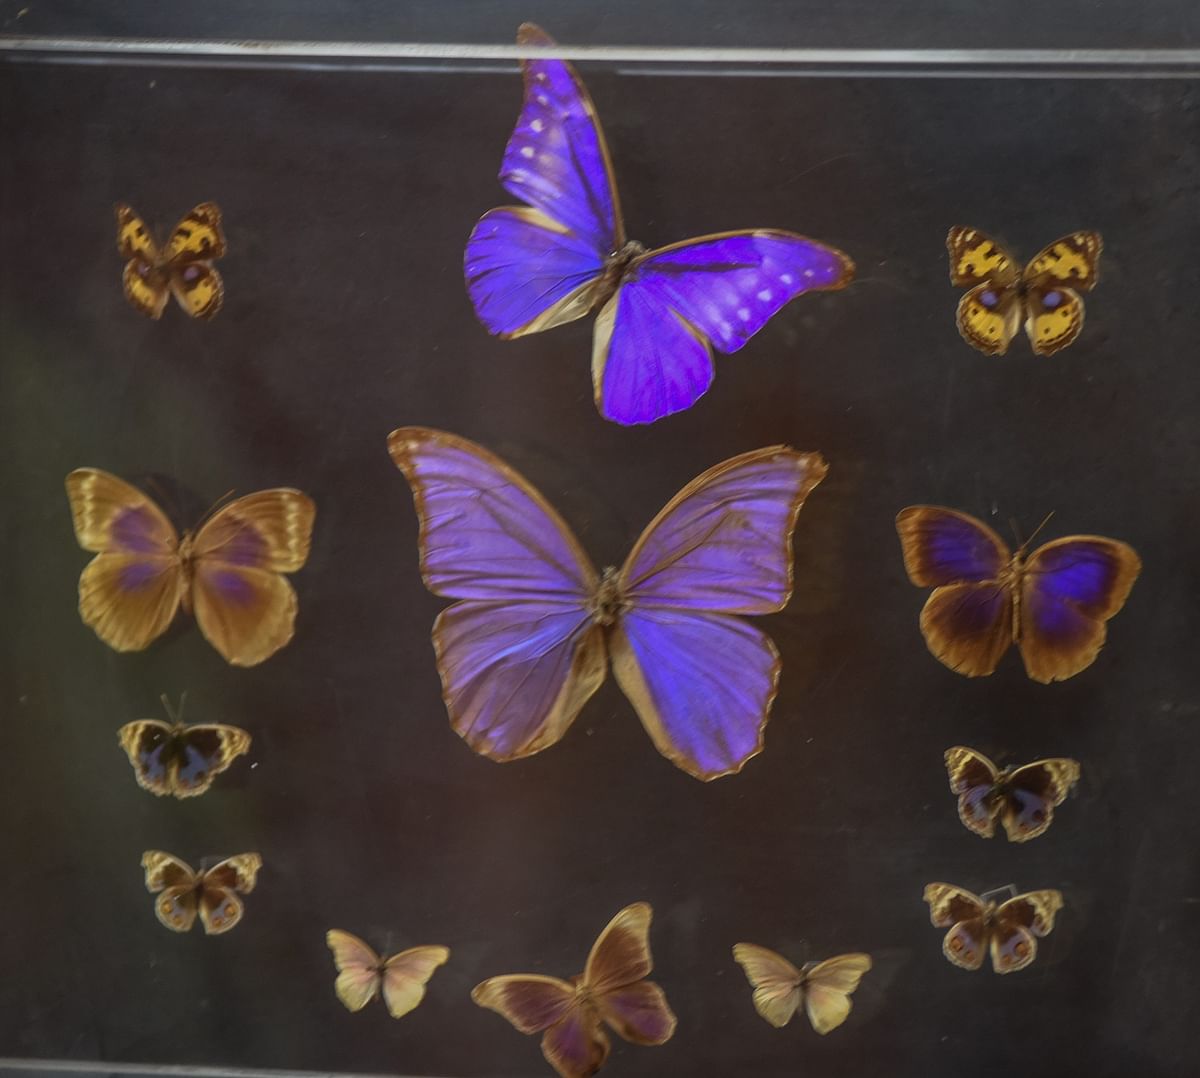 Iridescent butterflies, a interesting subject for Sir C V Raman. Photo by S K Dinesh